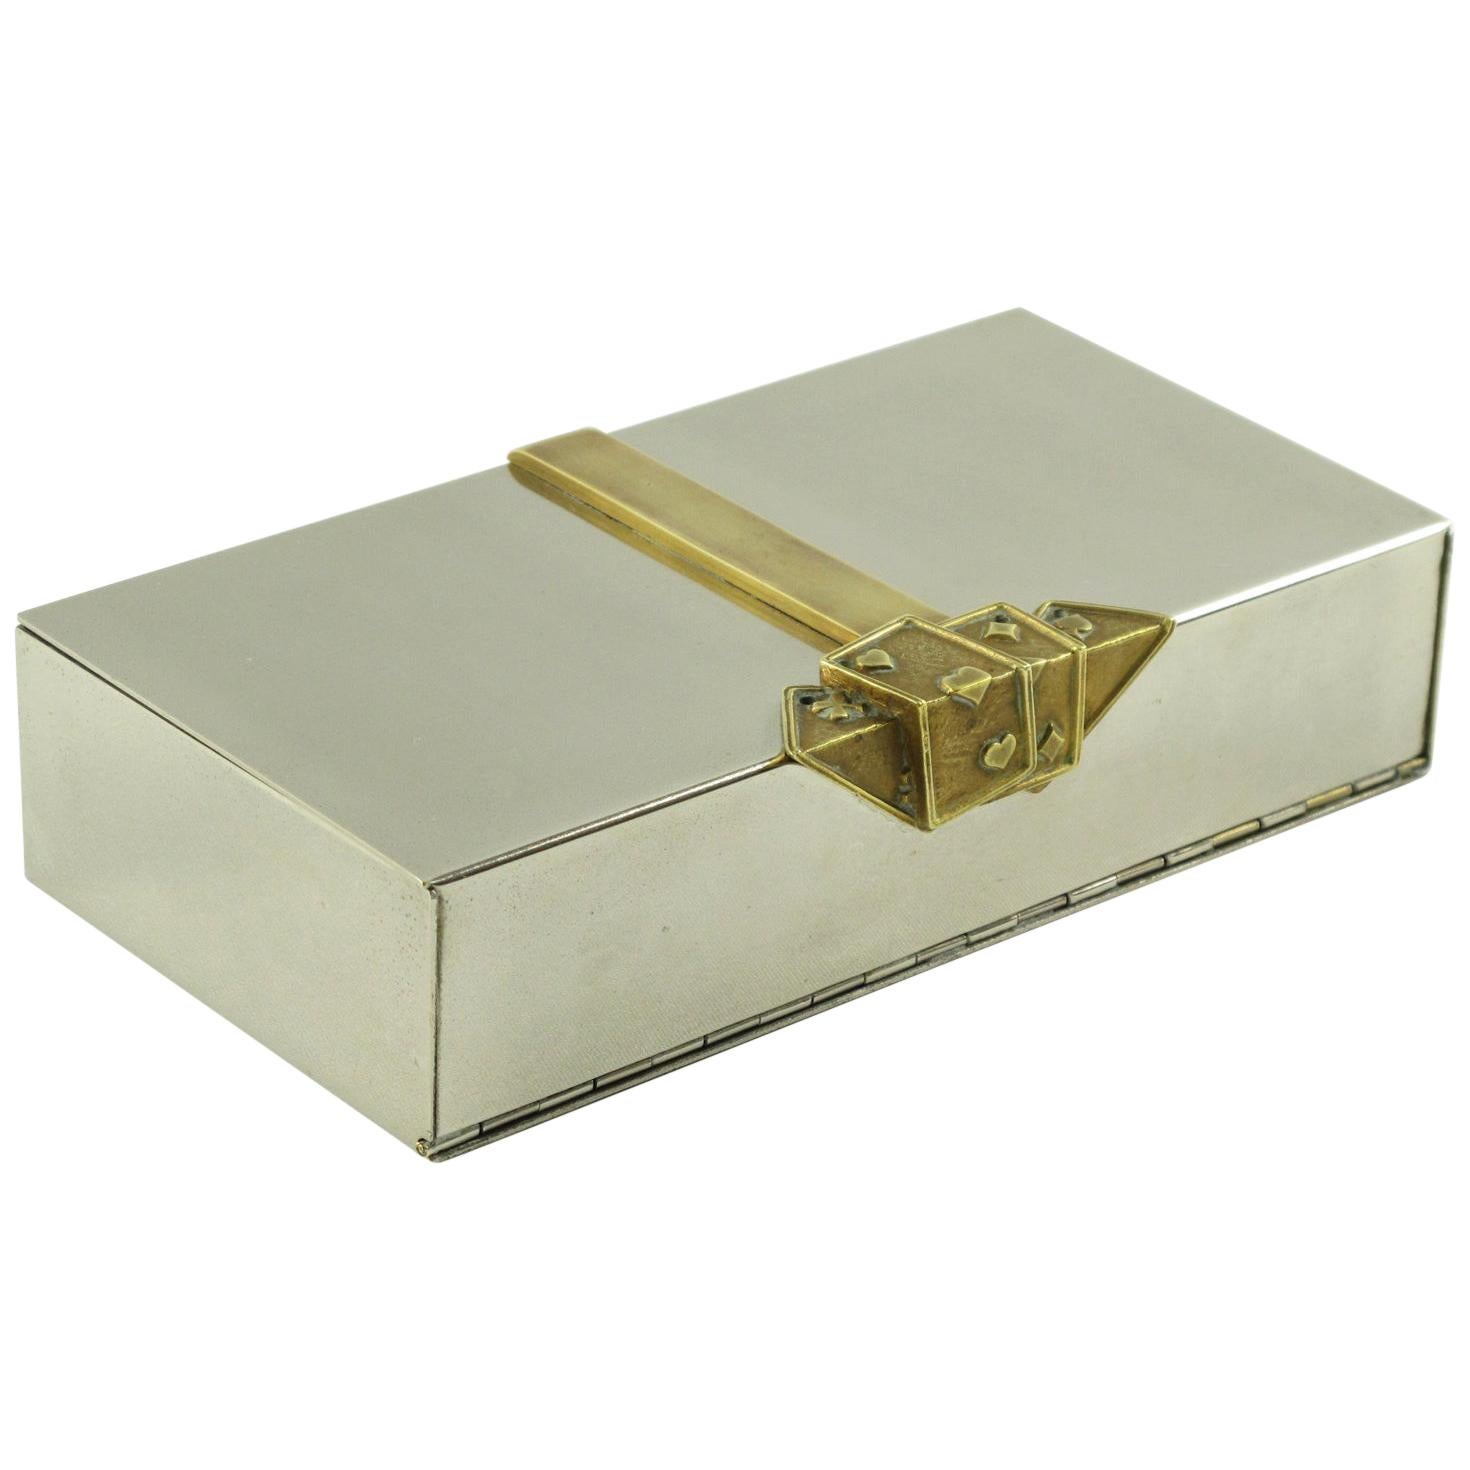 Maria Pergay Style Stainless Steel and Brass Box